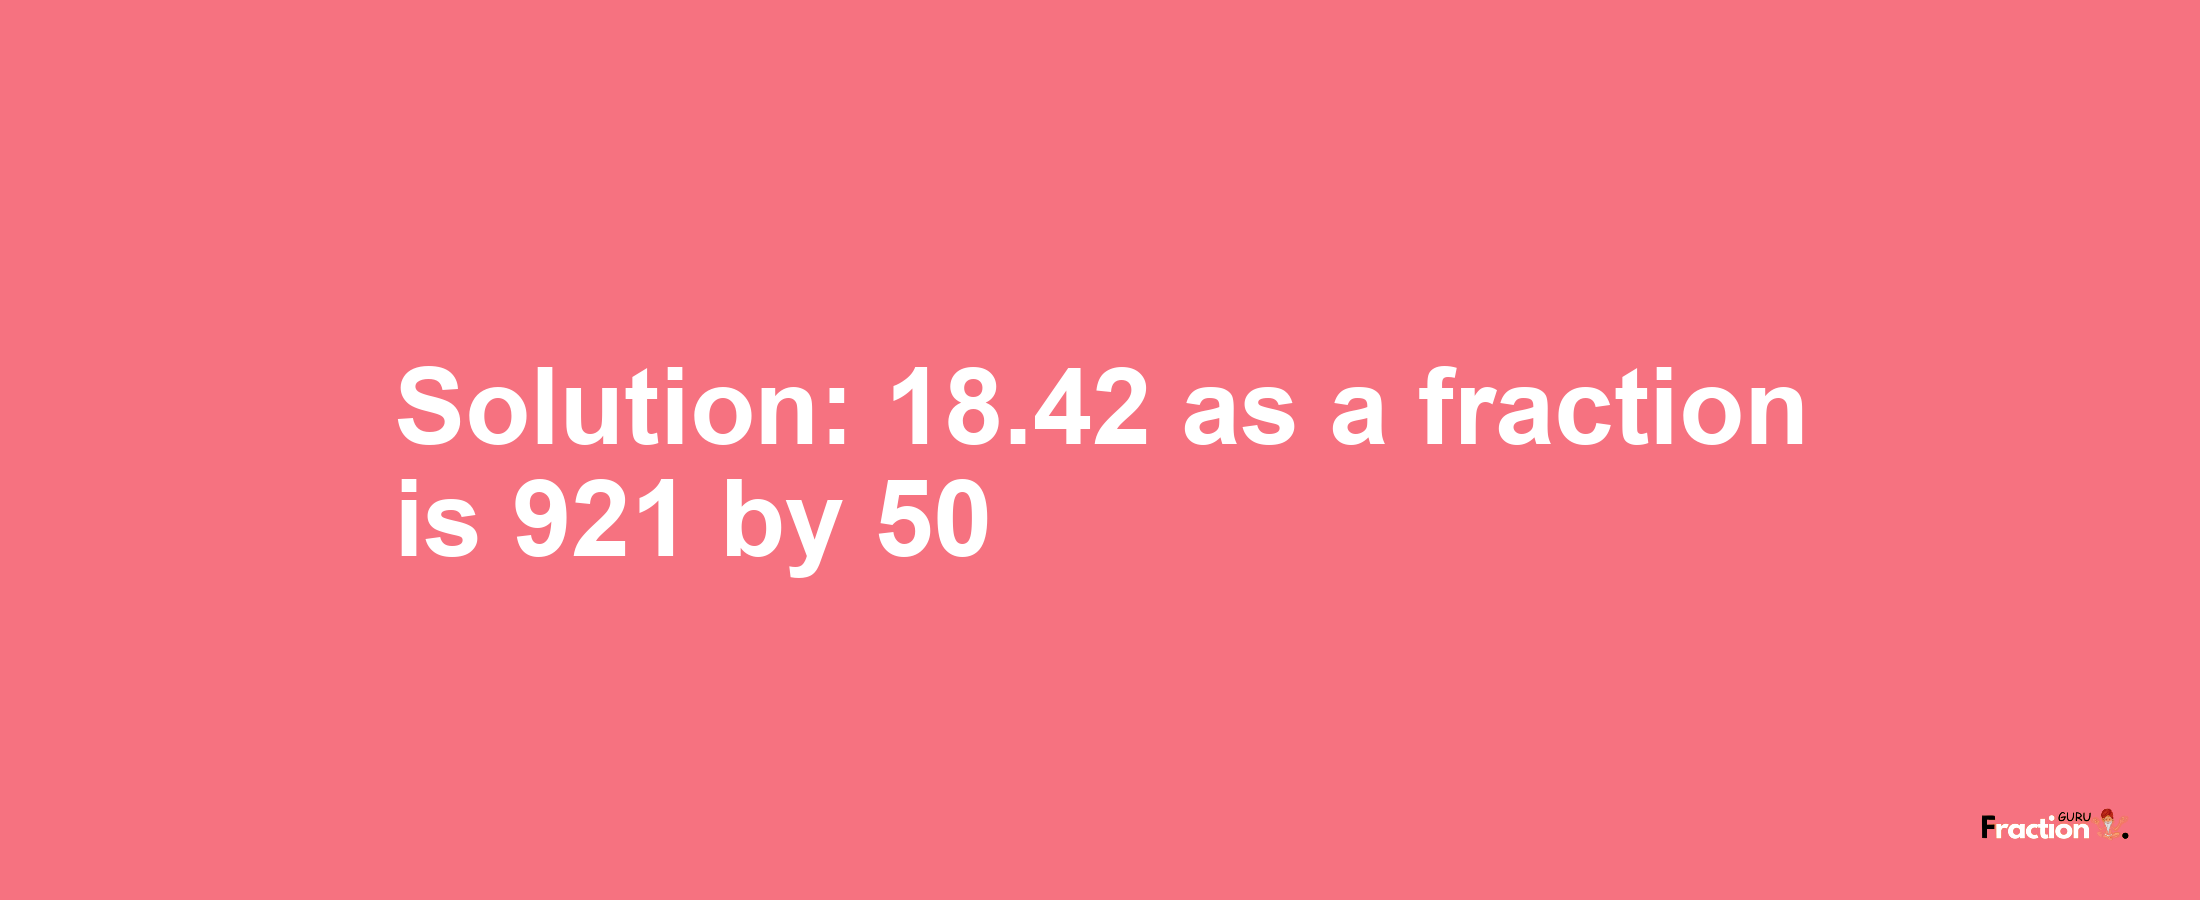 Solution:18.42 as a fraction is 921/50